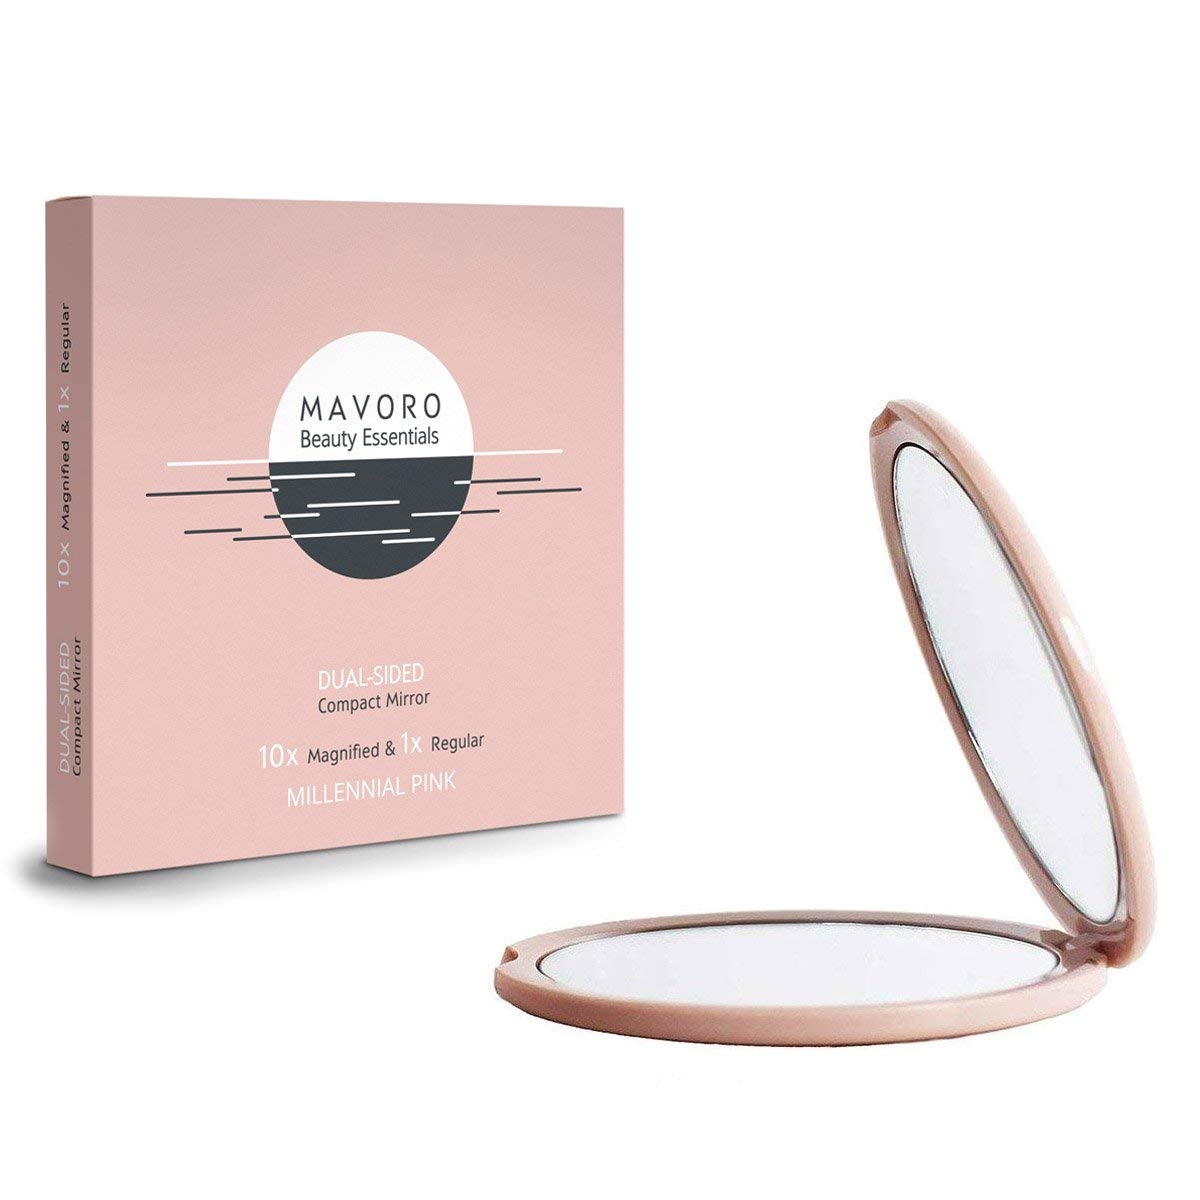 amazon com magnifying compact mirror 10x magnification 1x mirror 2 sided 4 inch handheld magnified makeup mirror for purses and travel mavoro beauty